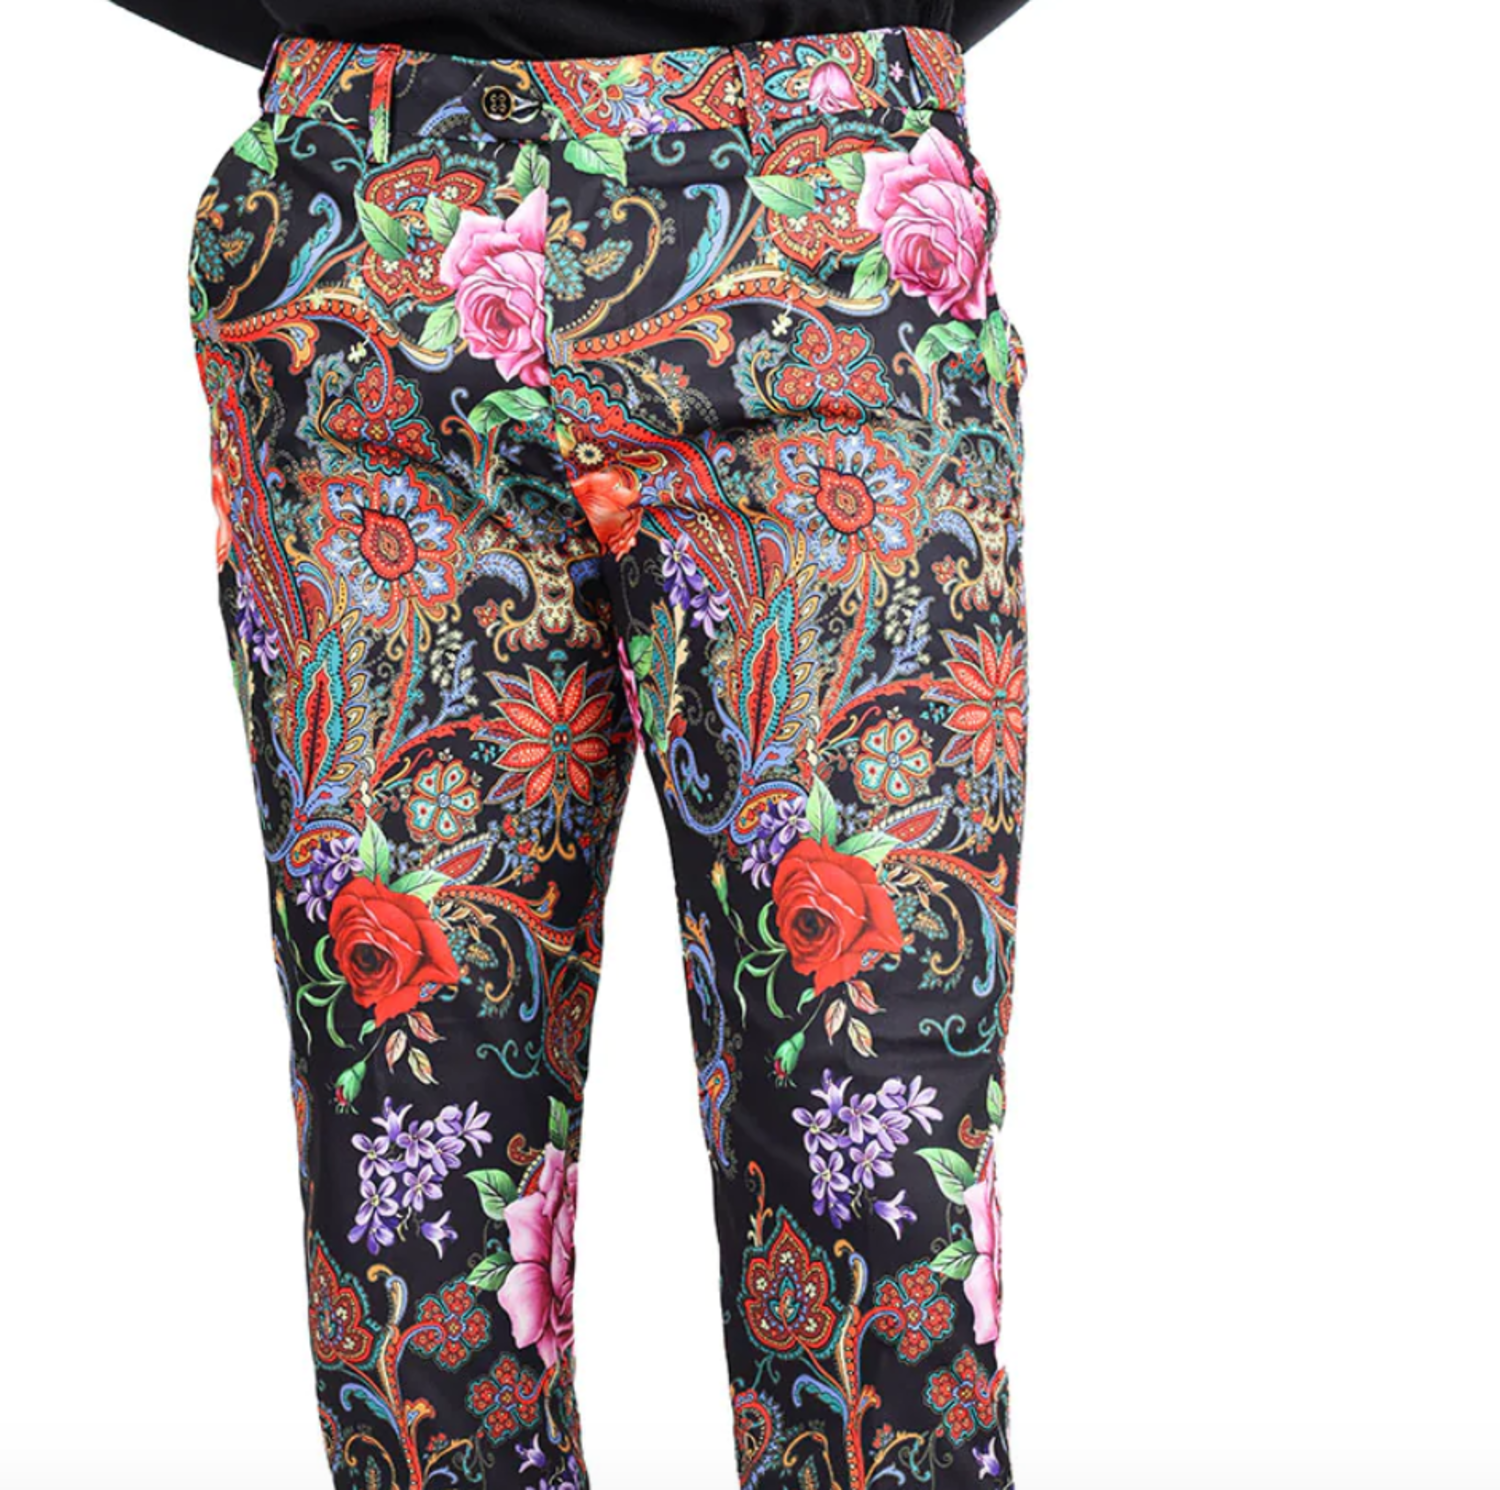 Mens Vintage Floral Casual Harem Thai Trousers Ethnic Yoga Beach Tapered  Pants | eBay